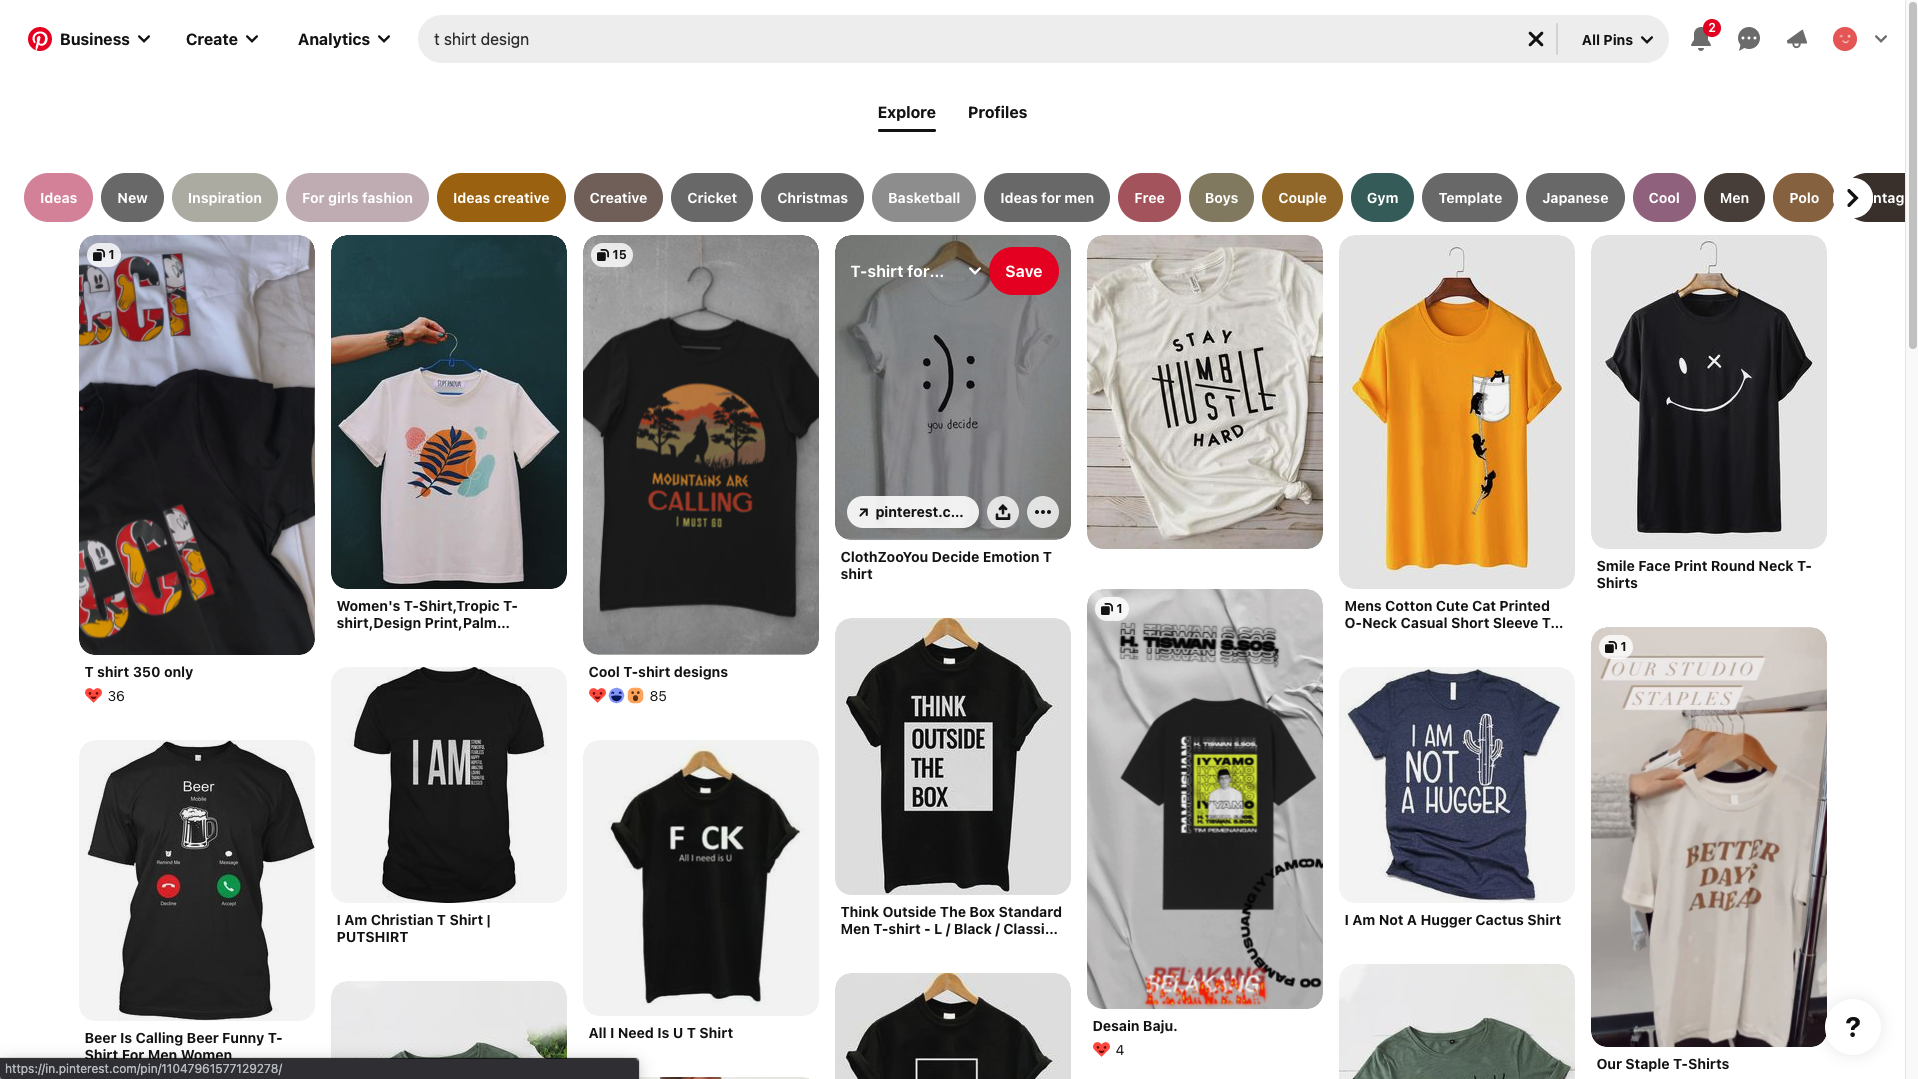 Design And Sell T Shirts Online India: Best Guide in 2024